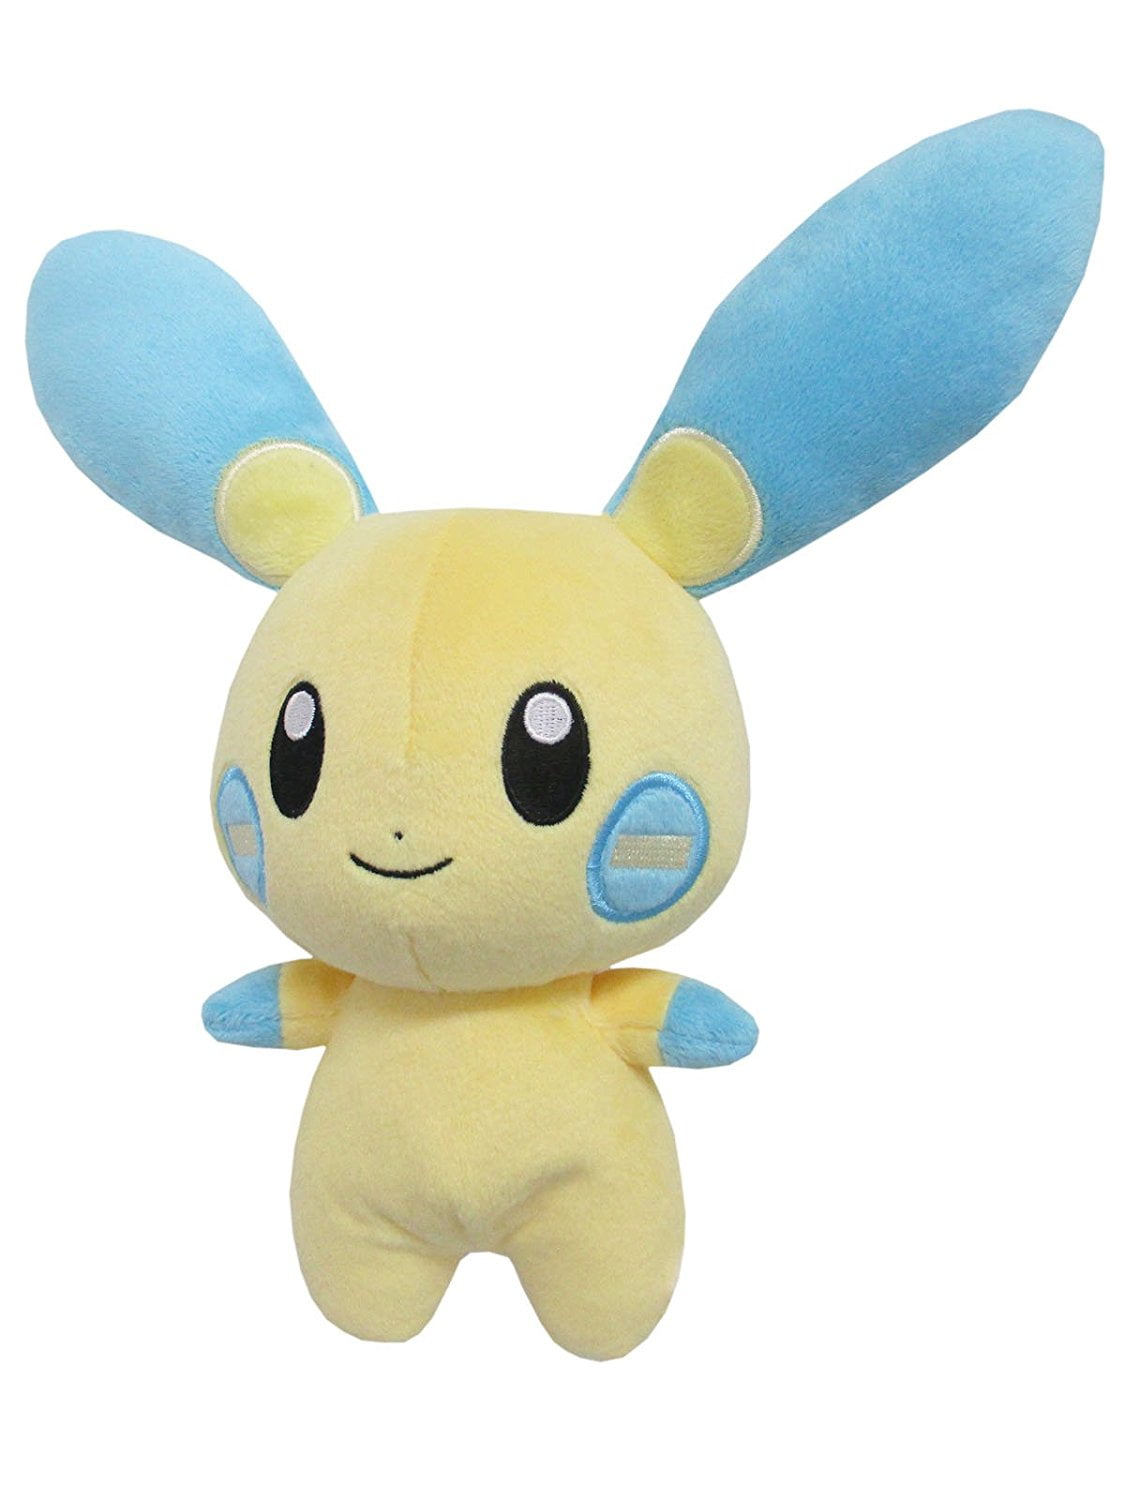 Pokemon All Star Collection Togepi Plush Doll S Pp43 Japan Anime 247 for sale online 